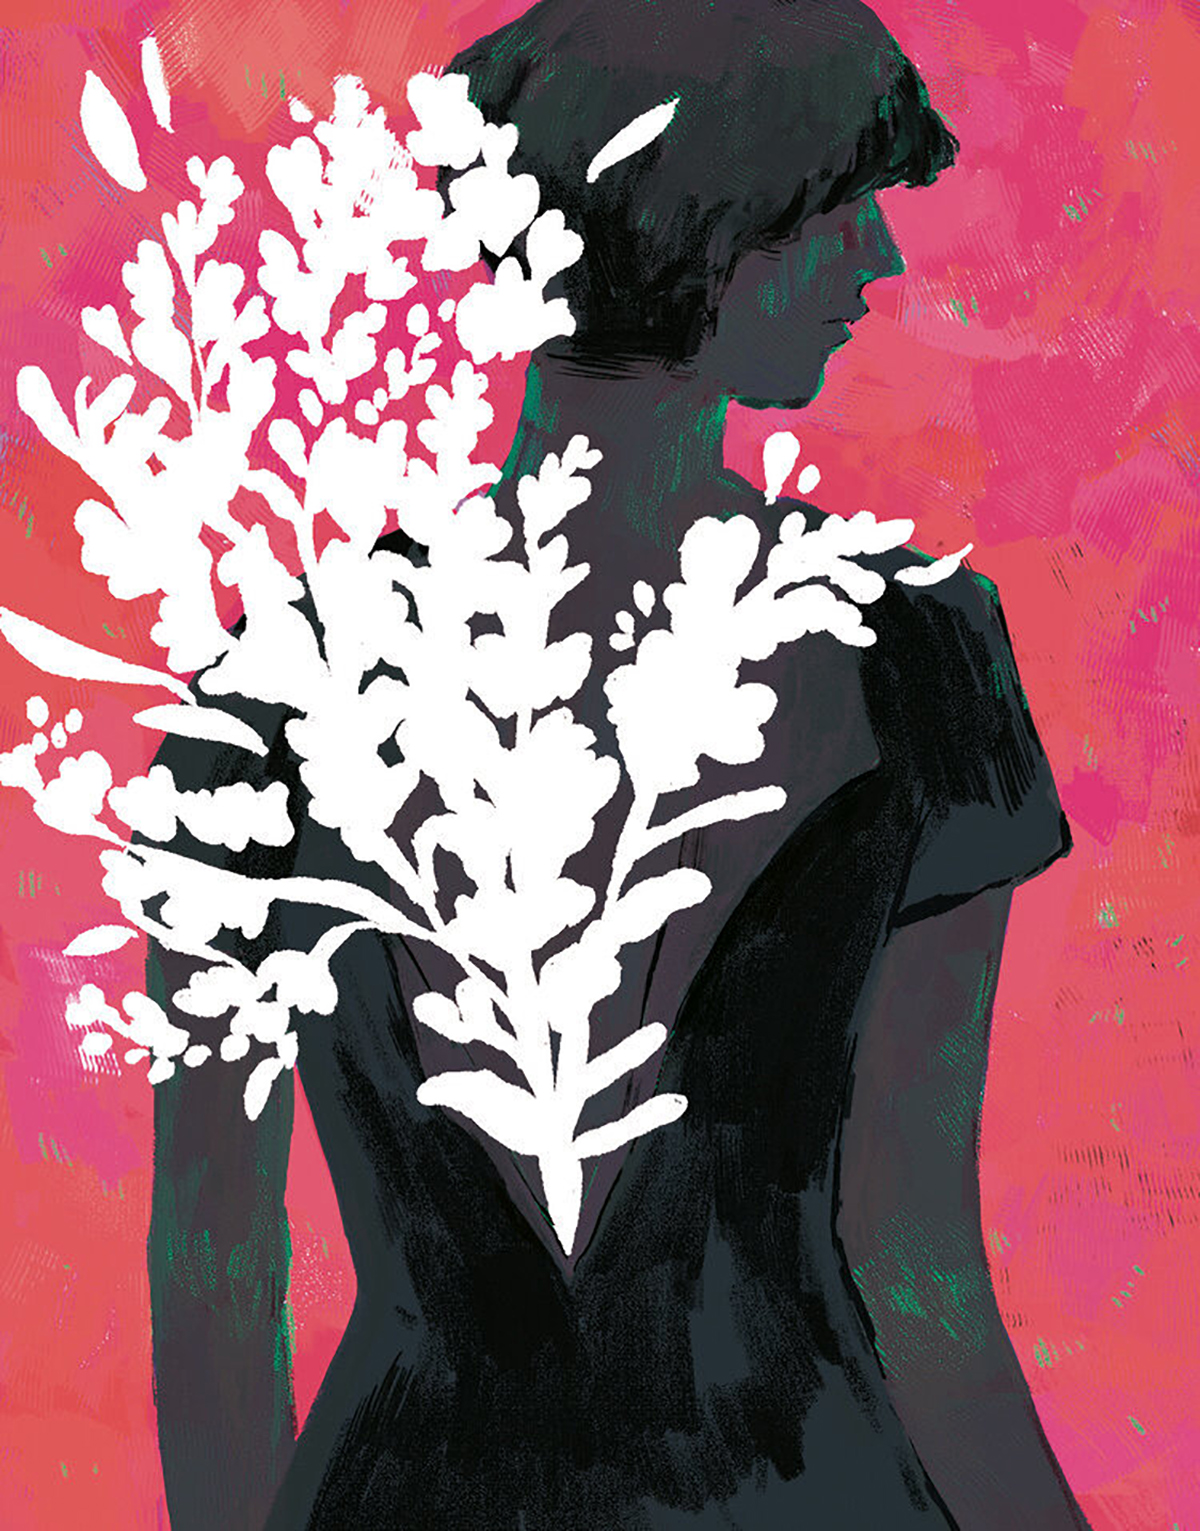 Digital painting of a woman in black dress, back to viewer, dark figure against pink background, with white painted flowers blooming from the back of her dress branching to upper left